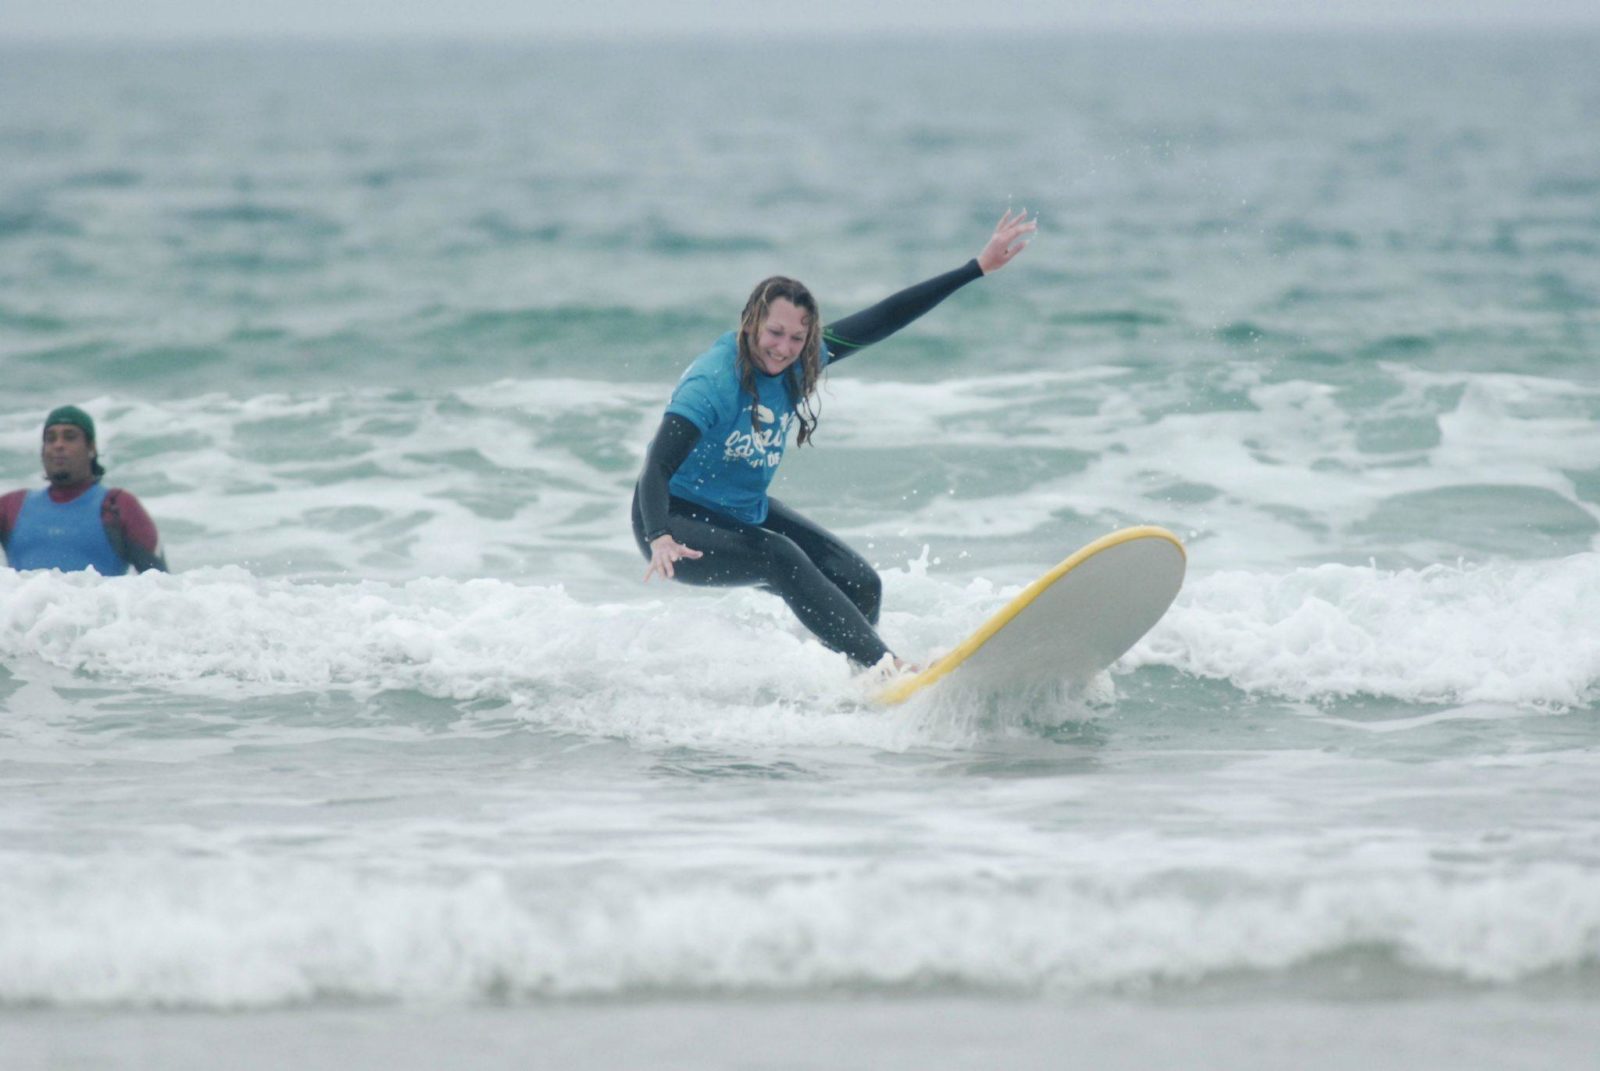 A woman is surfing on the waves in Spain.